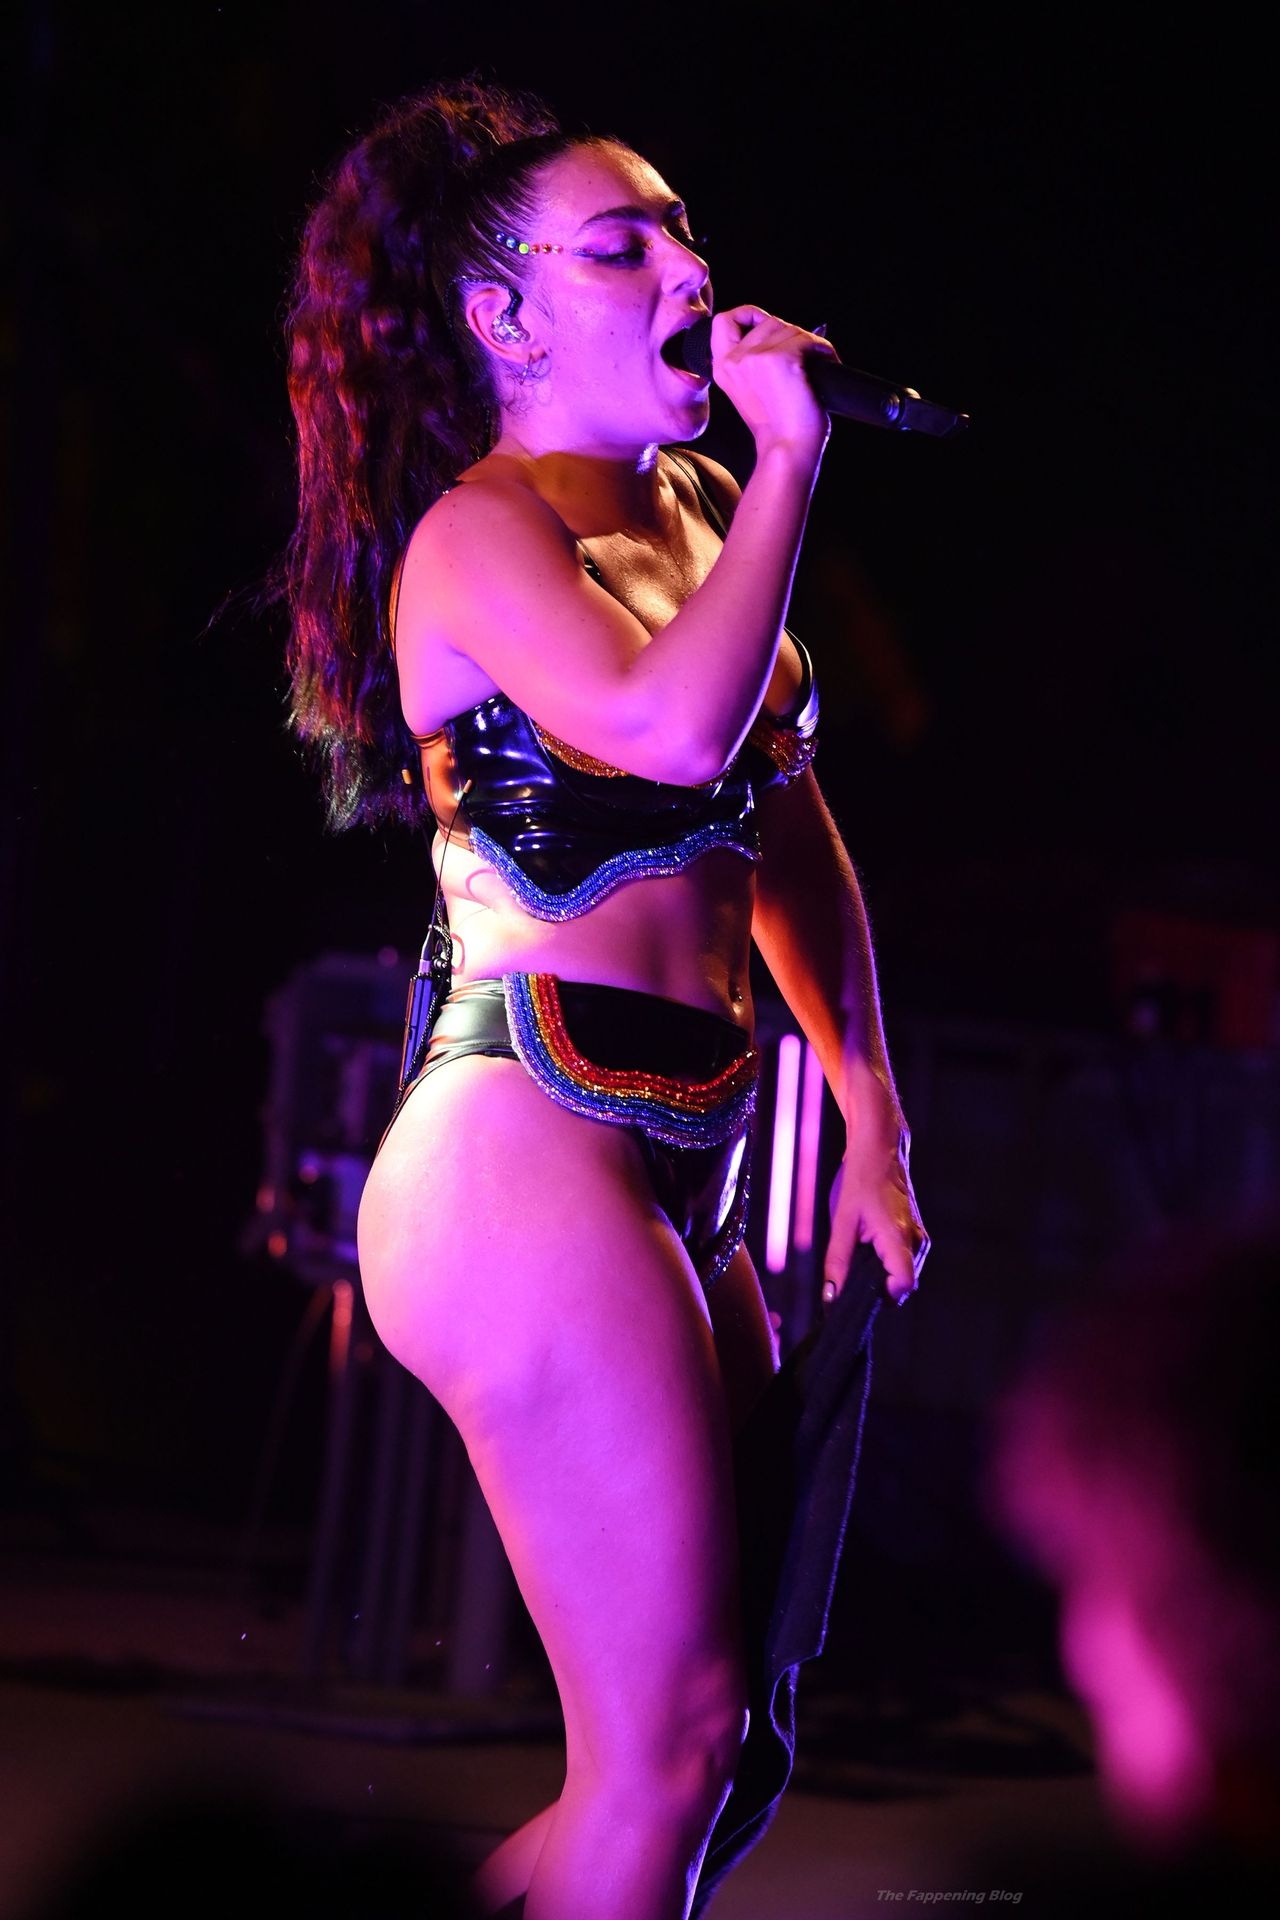 Charli-XCX-Sexy-The-Fappening-Blog-27.jpg